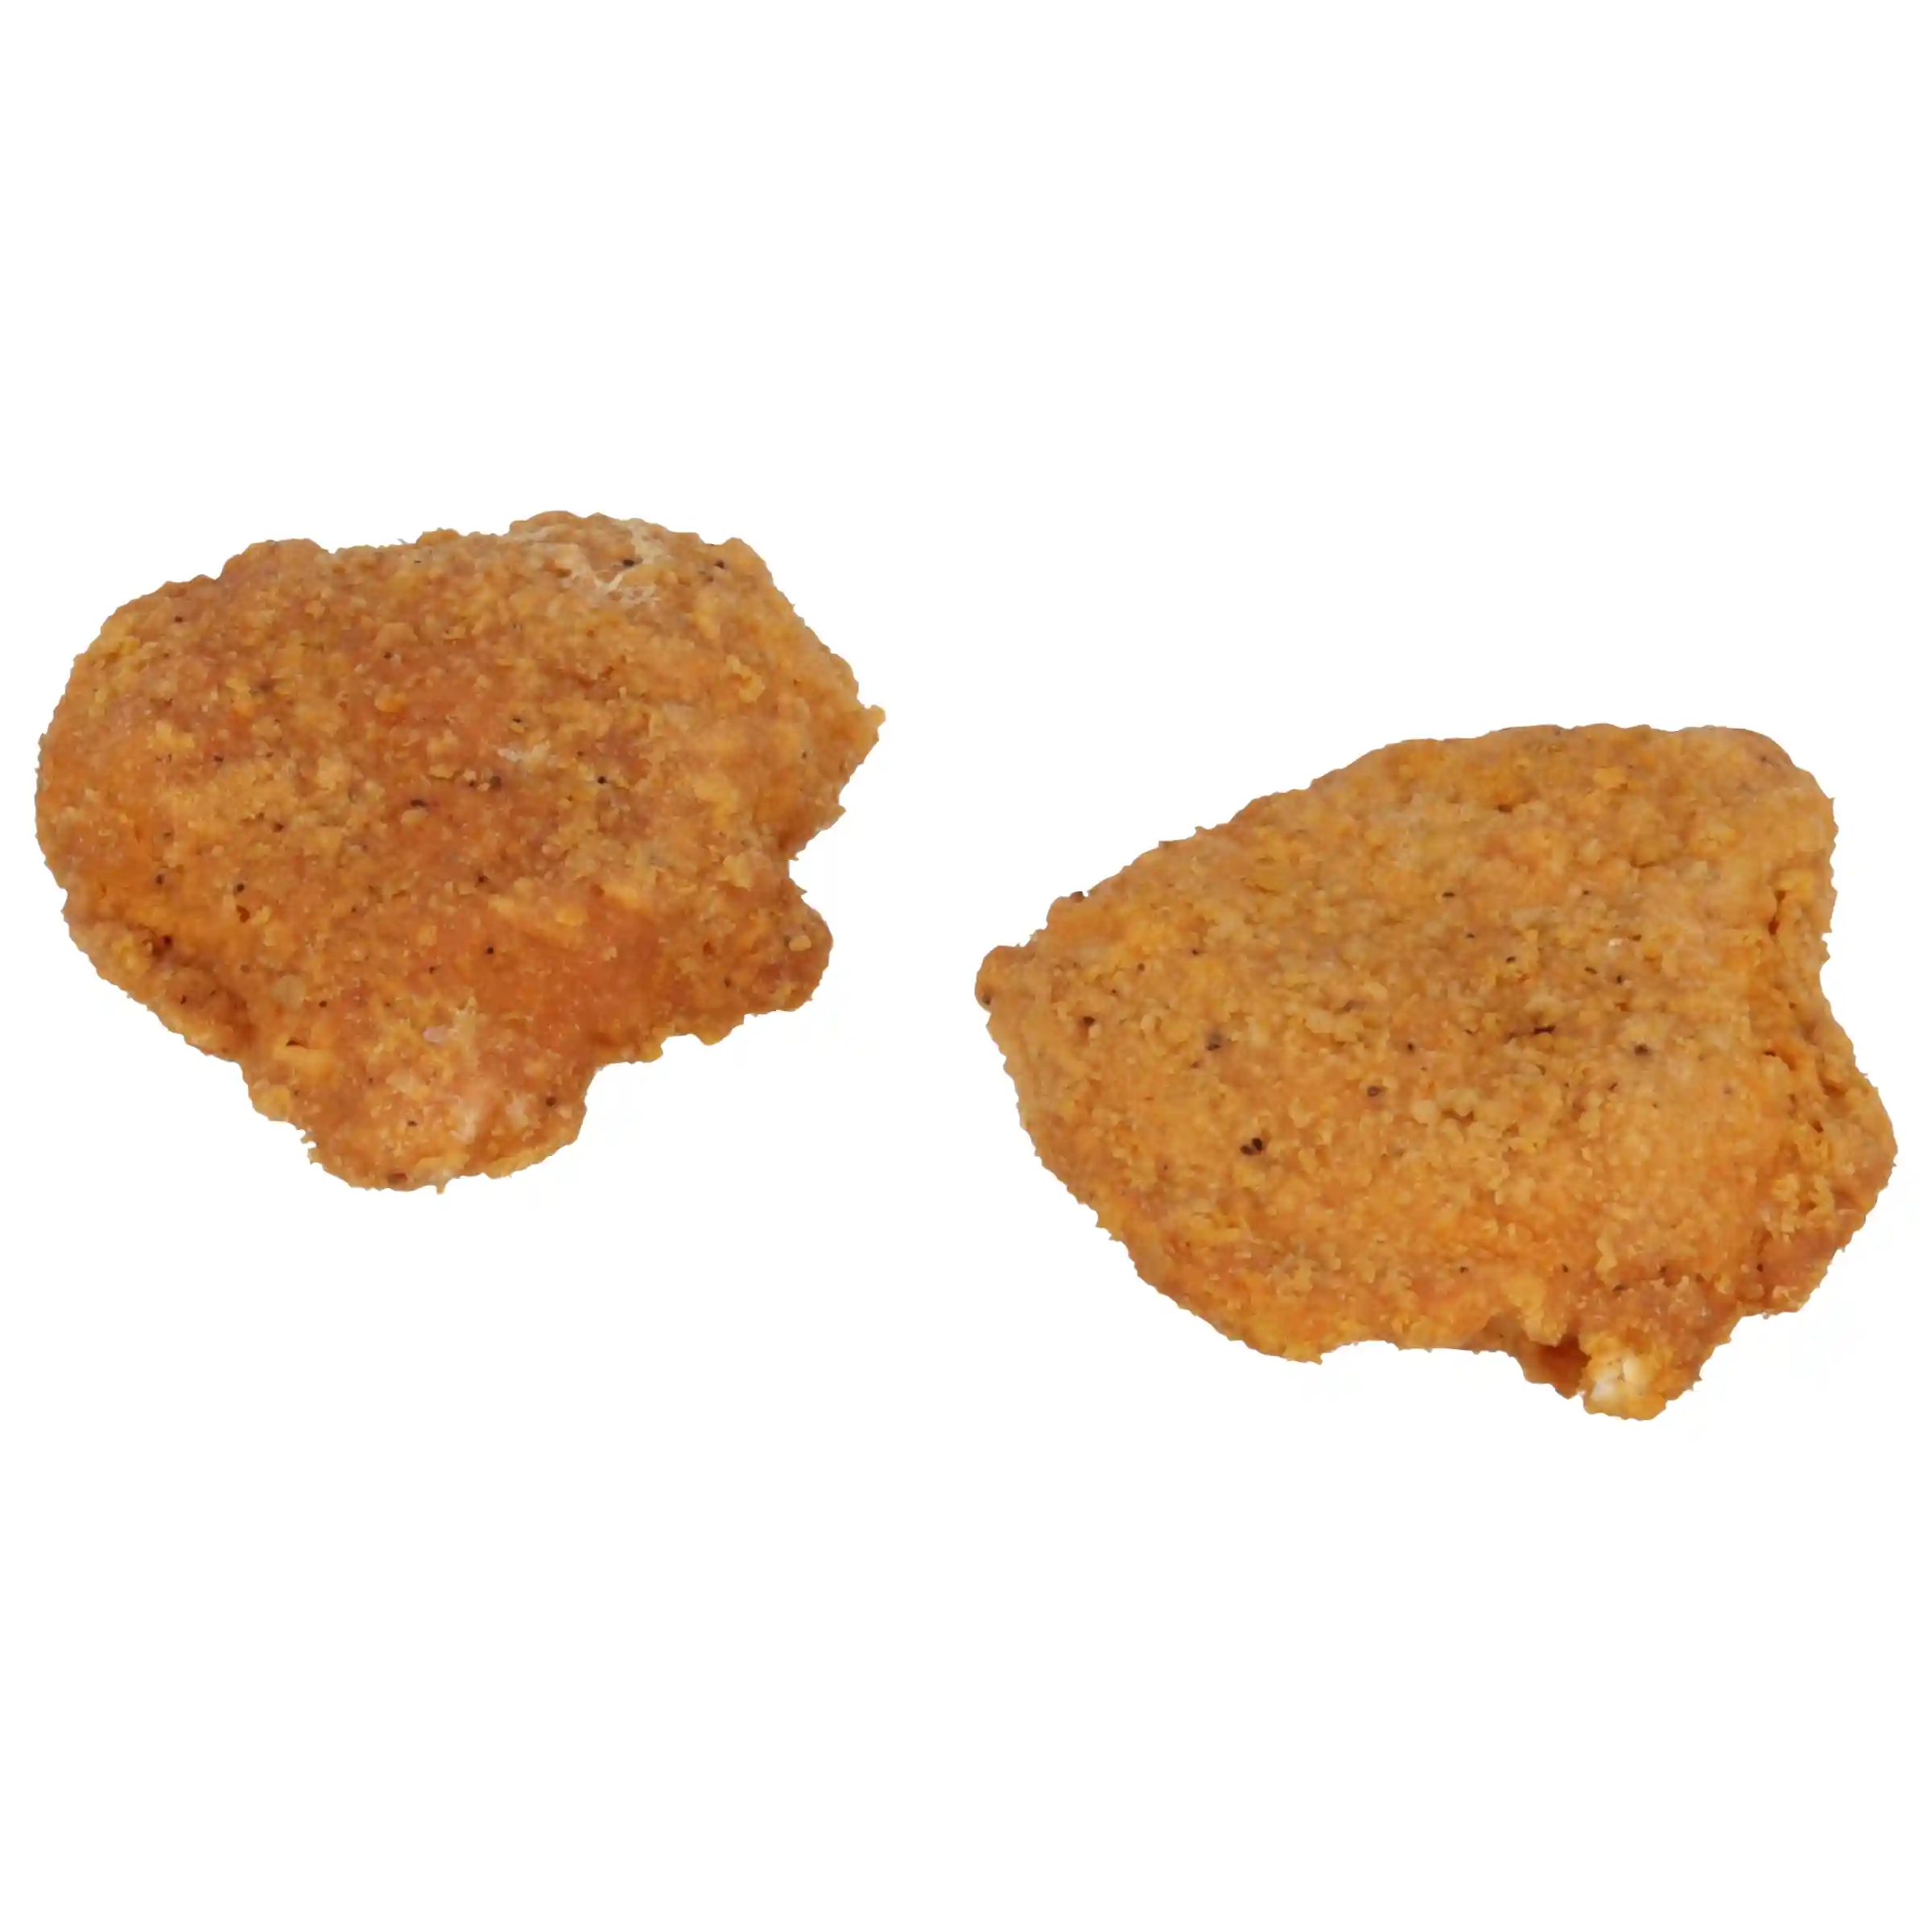 Tyson® Fully Cooked Whole Grain Breaded Hot & Spicy MWWM Chicken Breast Filets, CN, 3.75 oz. _image_11